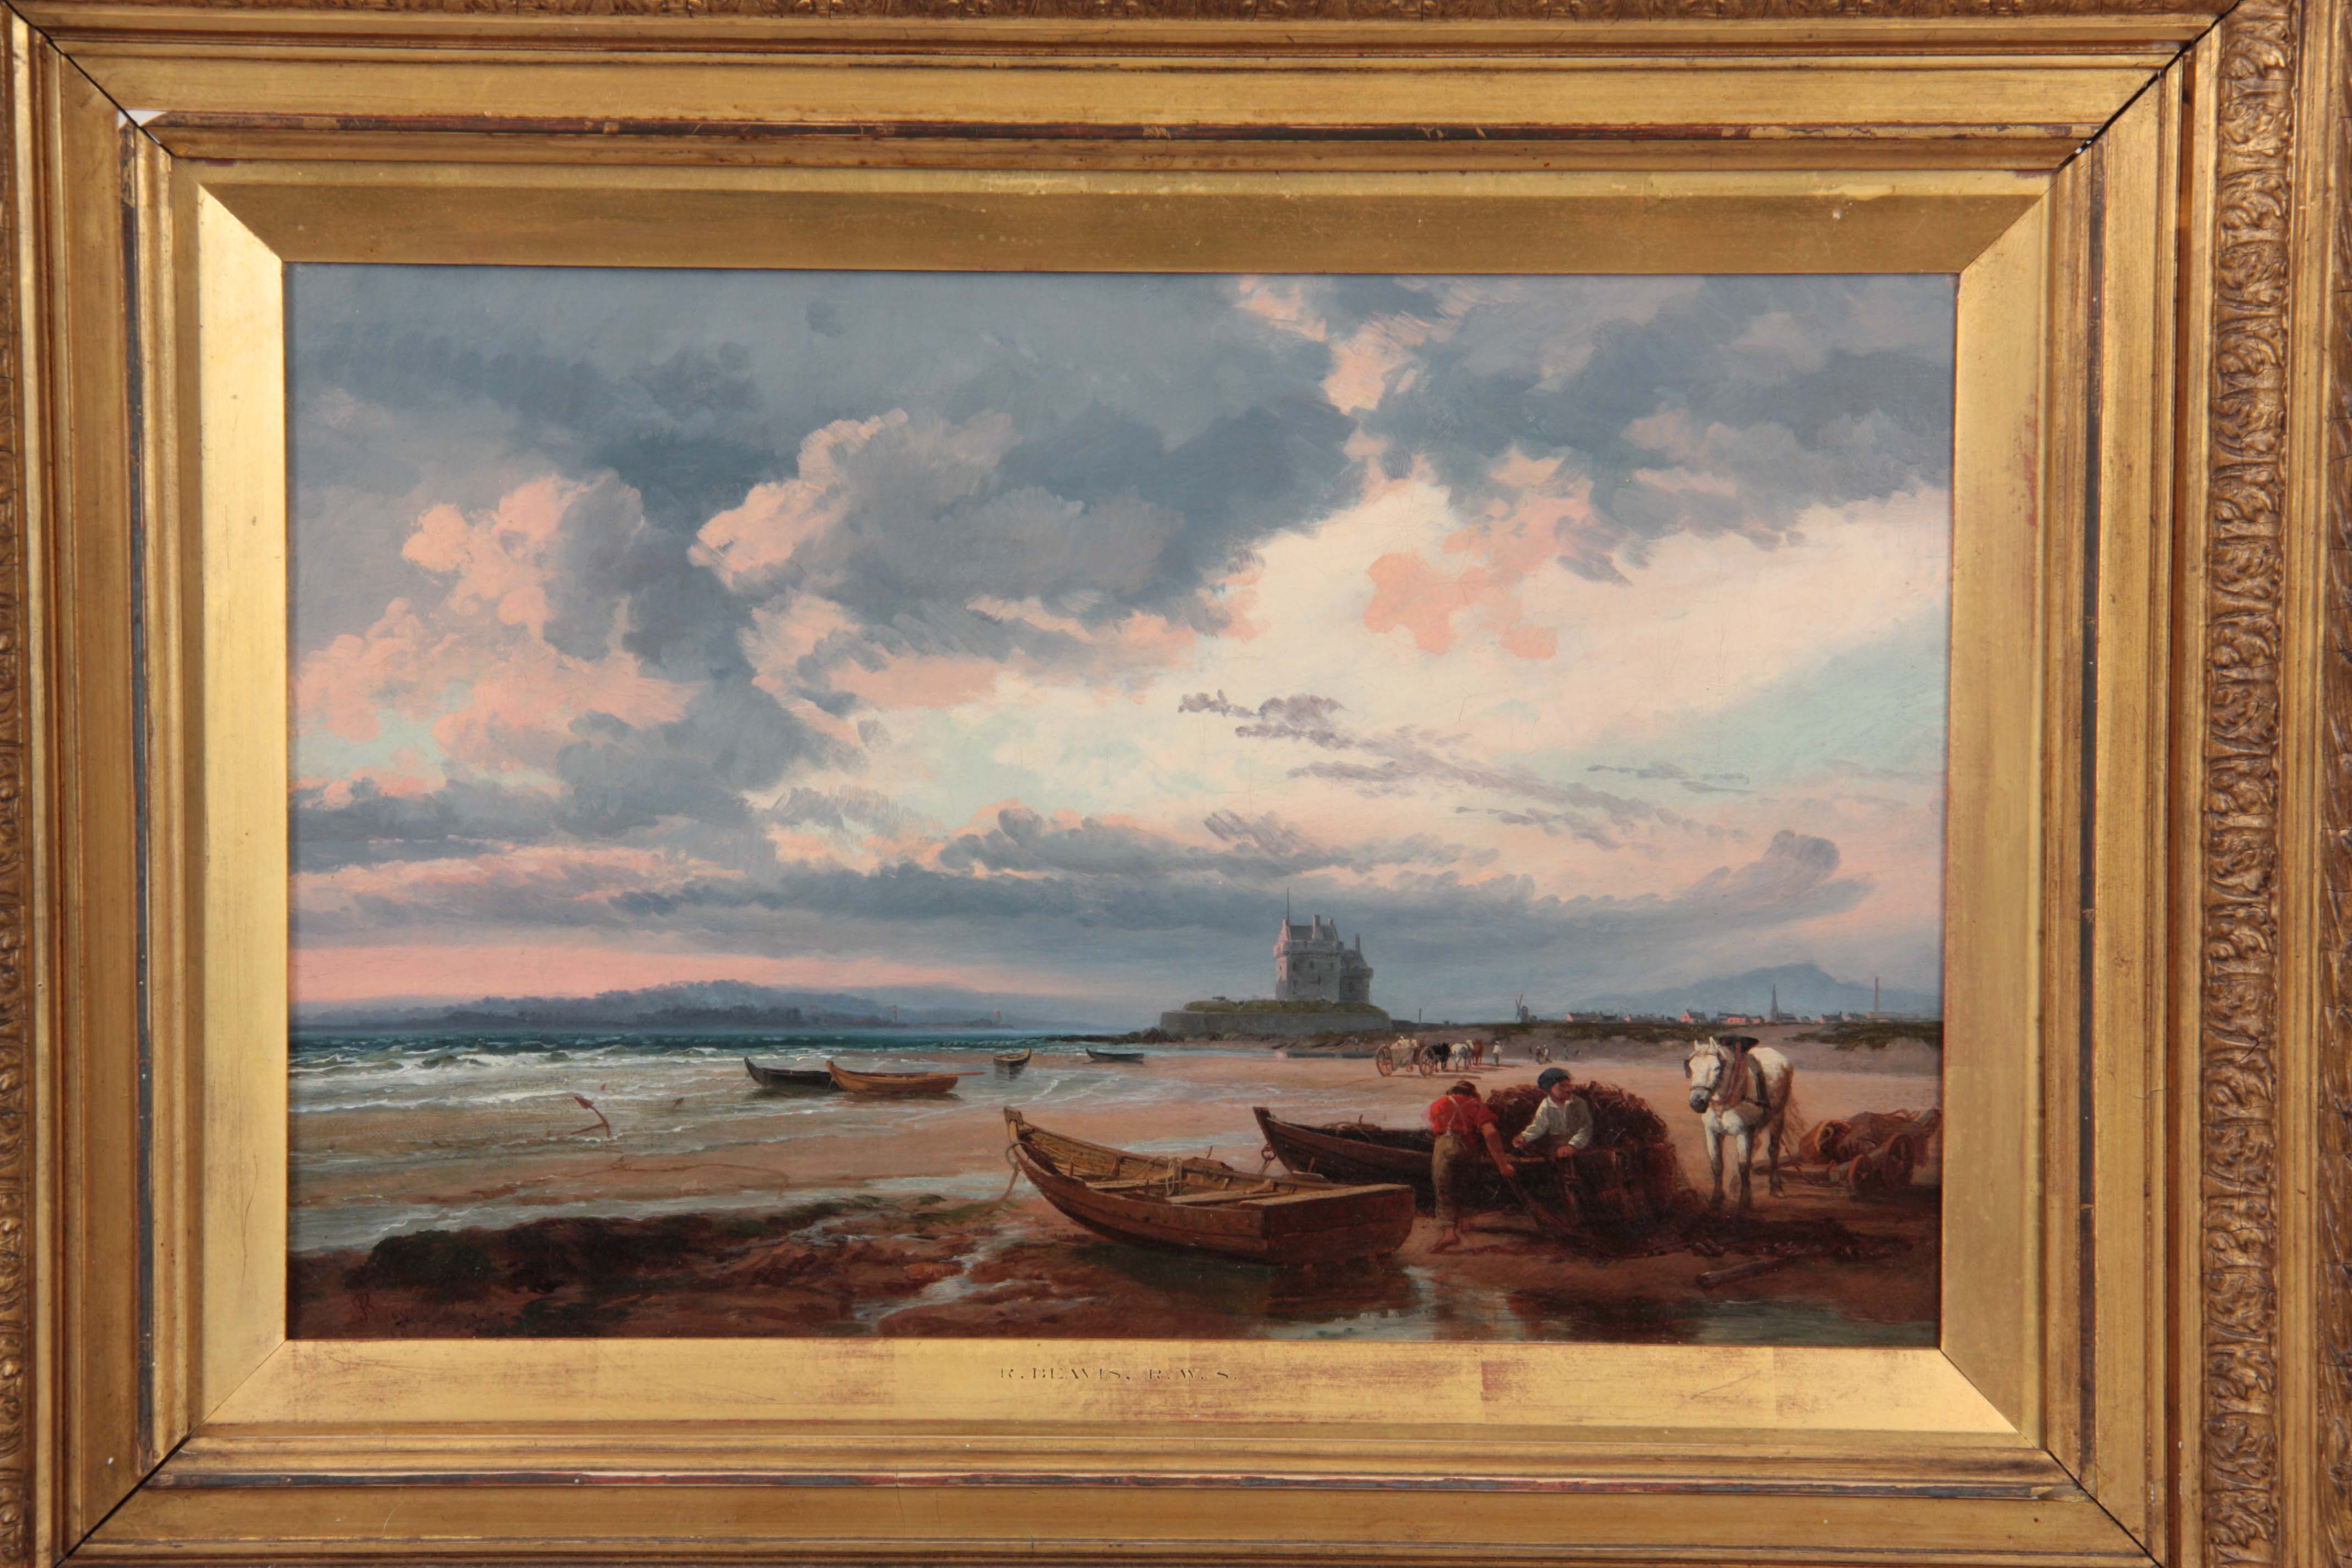 RICHARD BEAVIS 1824-1896. OIL ON CANVAS Beach scene with moored boats, fisherman and horse-drawn - Image 2 of 7